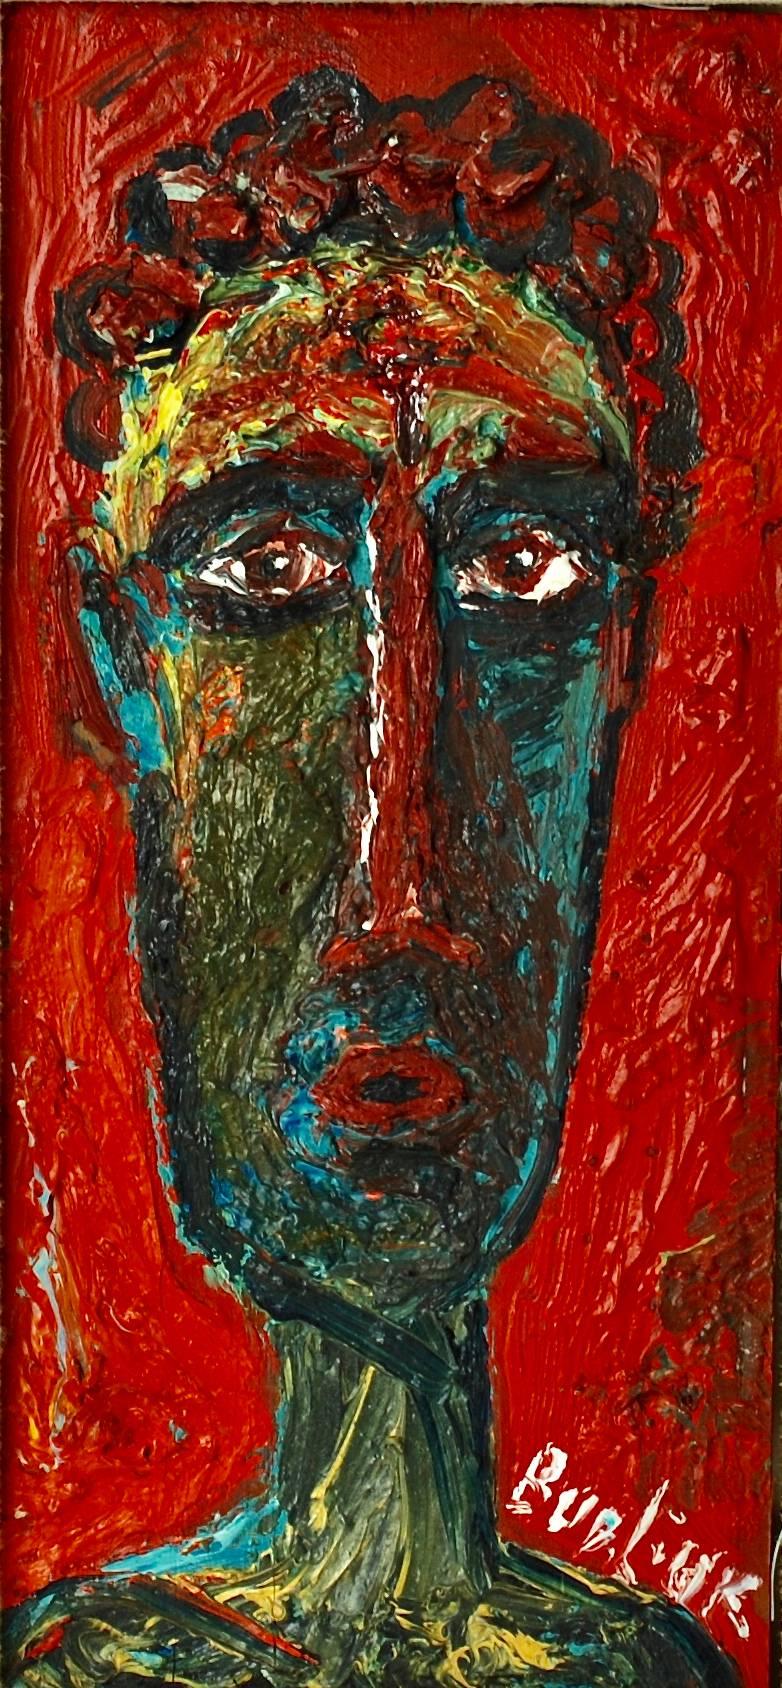 This vibrant neo-primitive portrait was executed by Ukranian born artist David Davidovich Burliuk (1882-1967). A student of the Kazan School of Fine Arts and Paris' Ecole des Beaux Arts, Burliuk moved to the United States in 1922 and settled on Long